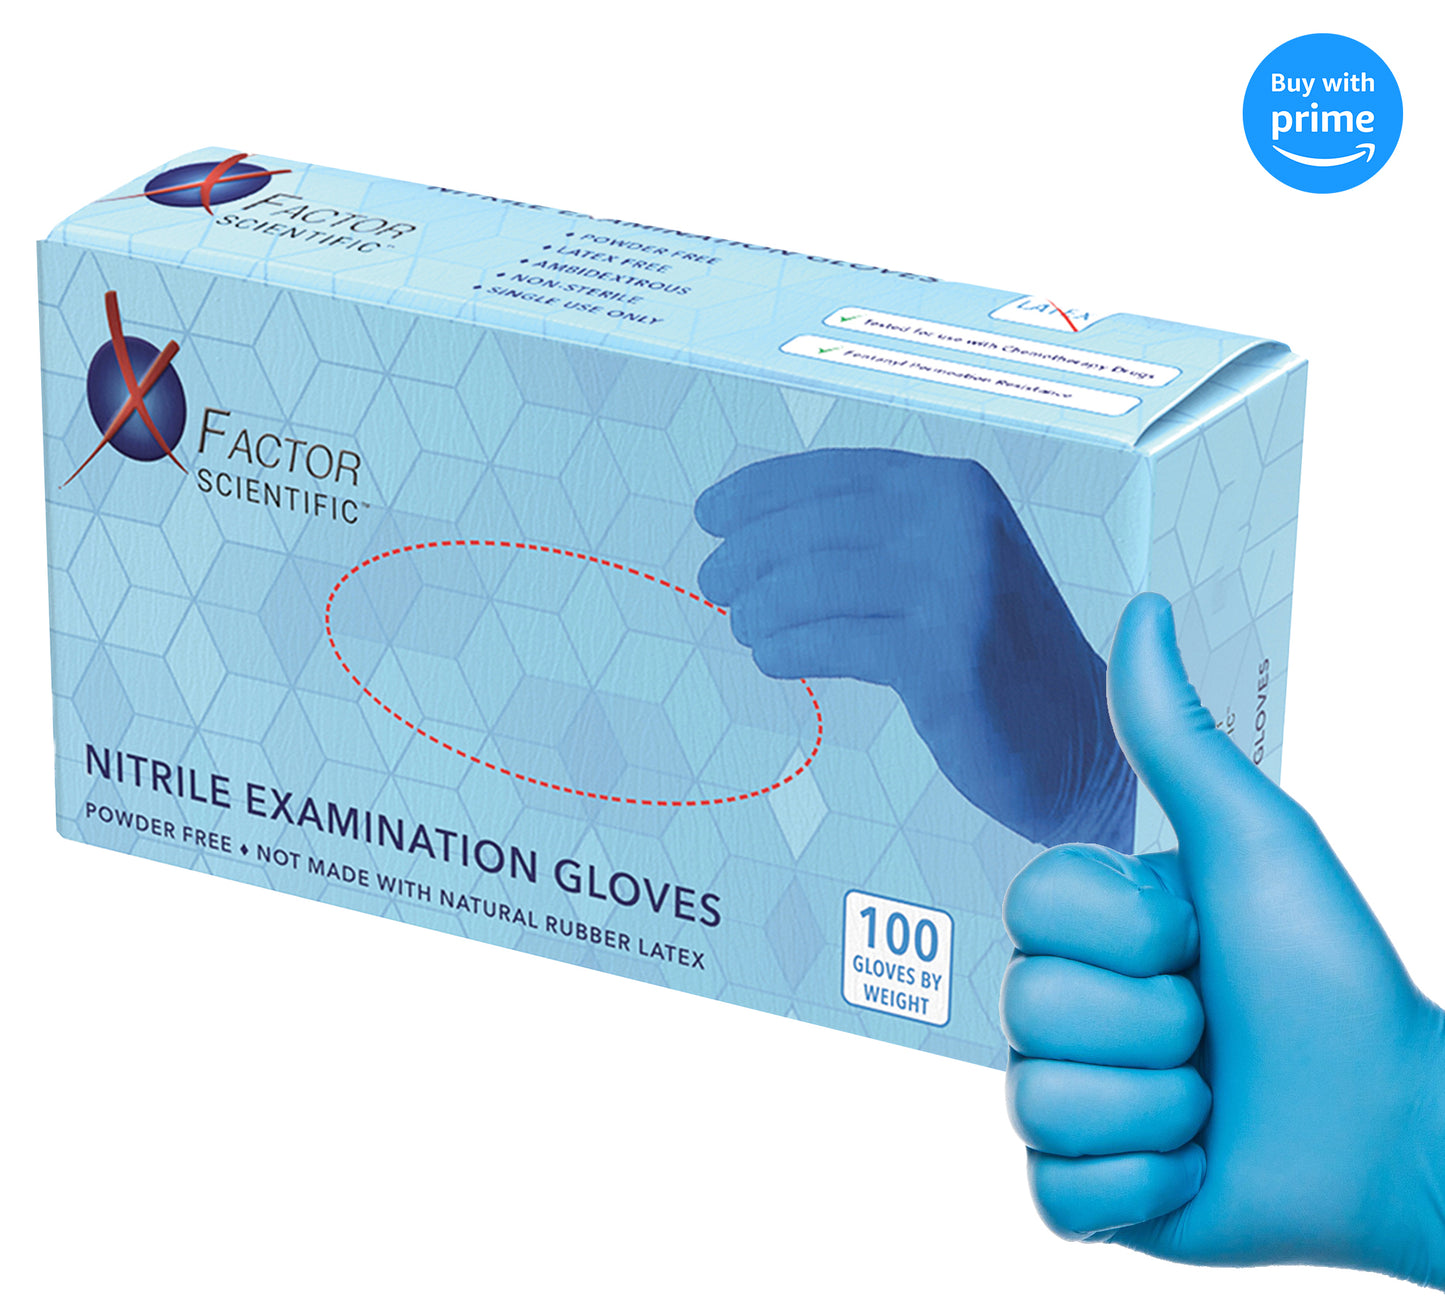 X Factor Scientific - 4 mils Exam Grade Nitrile Gloves, Powder Free, Medical Grade, Finger Textured, Latex Free Protective Glove, Food Safe FDA Approved - Box of 100